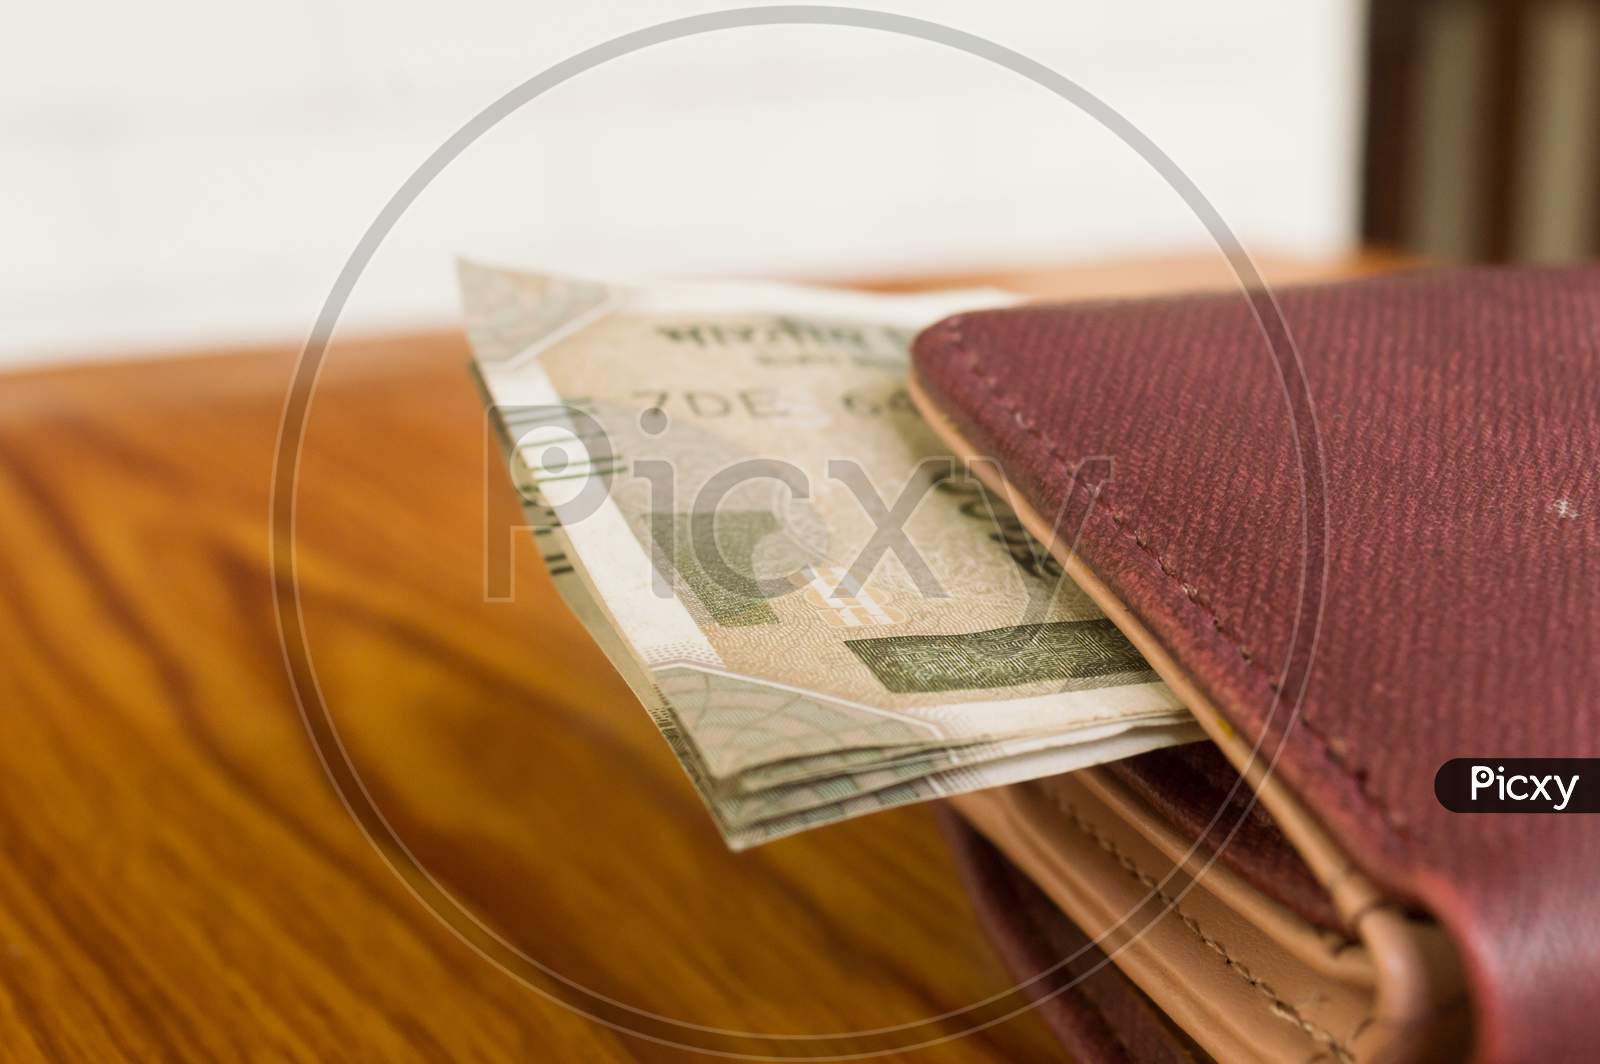 Indian Five Hundred 500 Rupee Cash Note in Brown Color Wallet Leather Purse  on a Wooden Table. Business Finance Economy Concept Stock Image - Image of  currency, commercial: 143039479